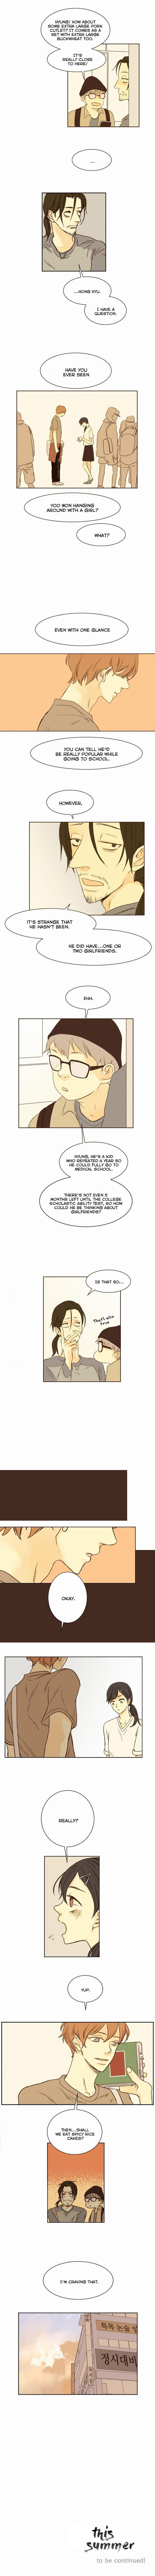 That Summer (KIM Hyun) Chapter 003 page 8